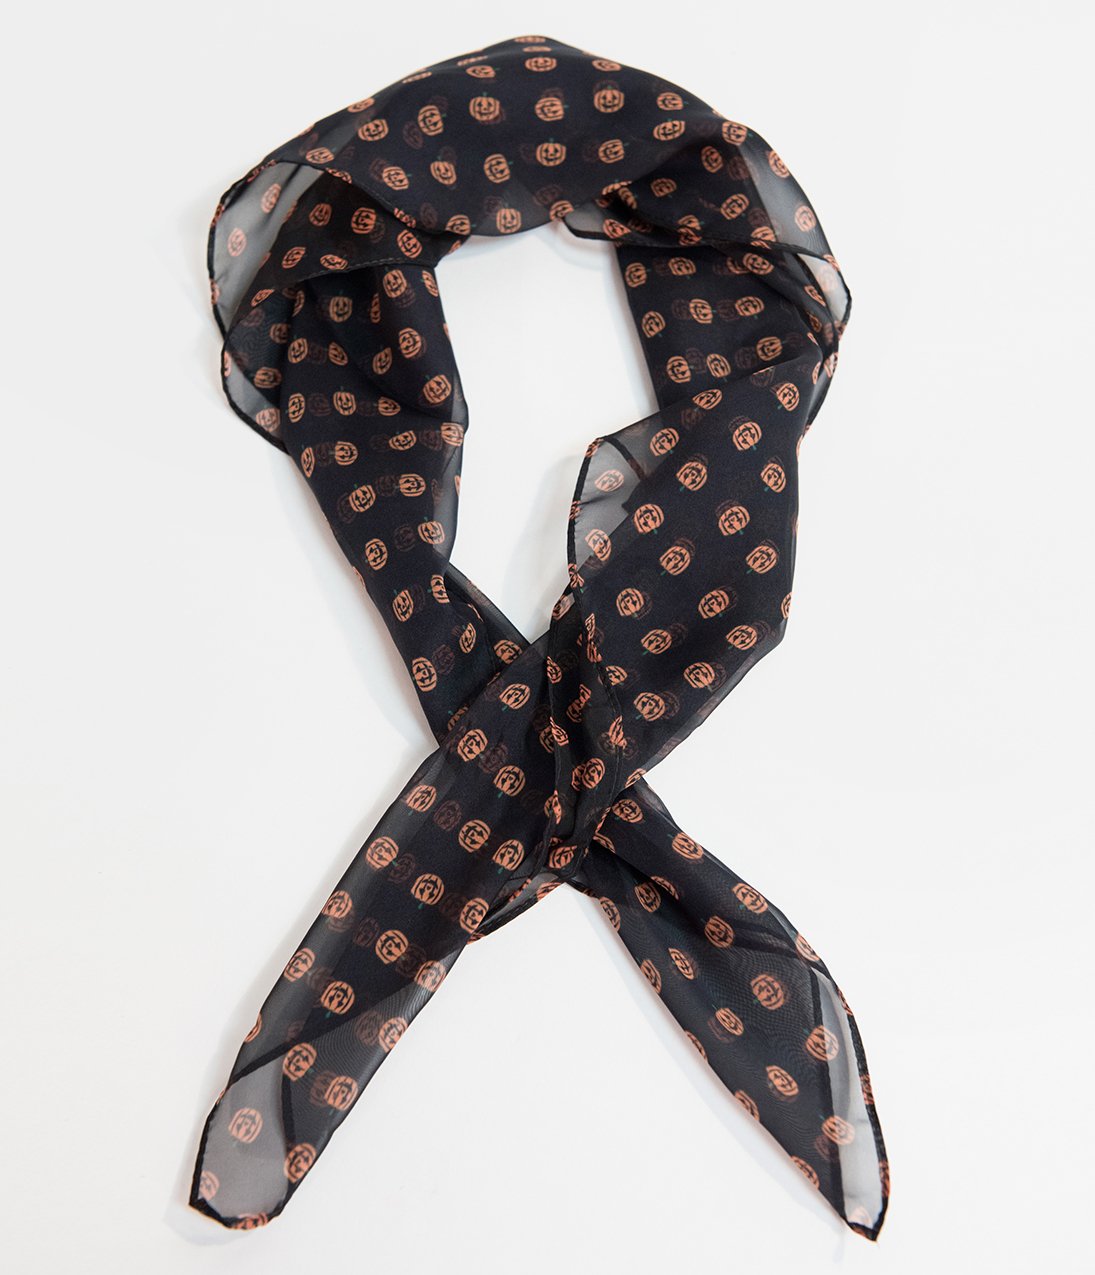 This is a black pinup style chiffon hair scarf that has orange pumpkins on it.